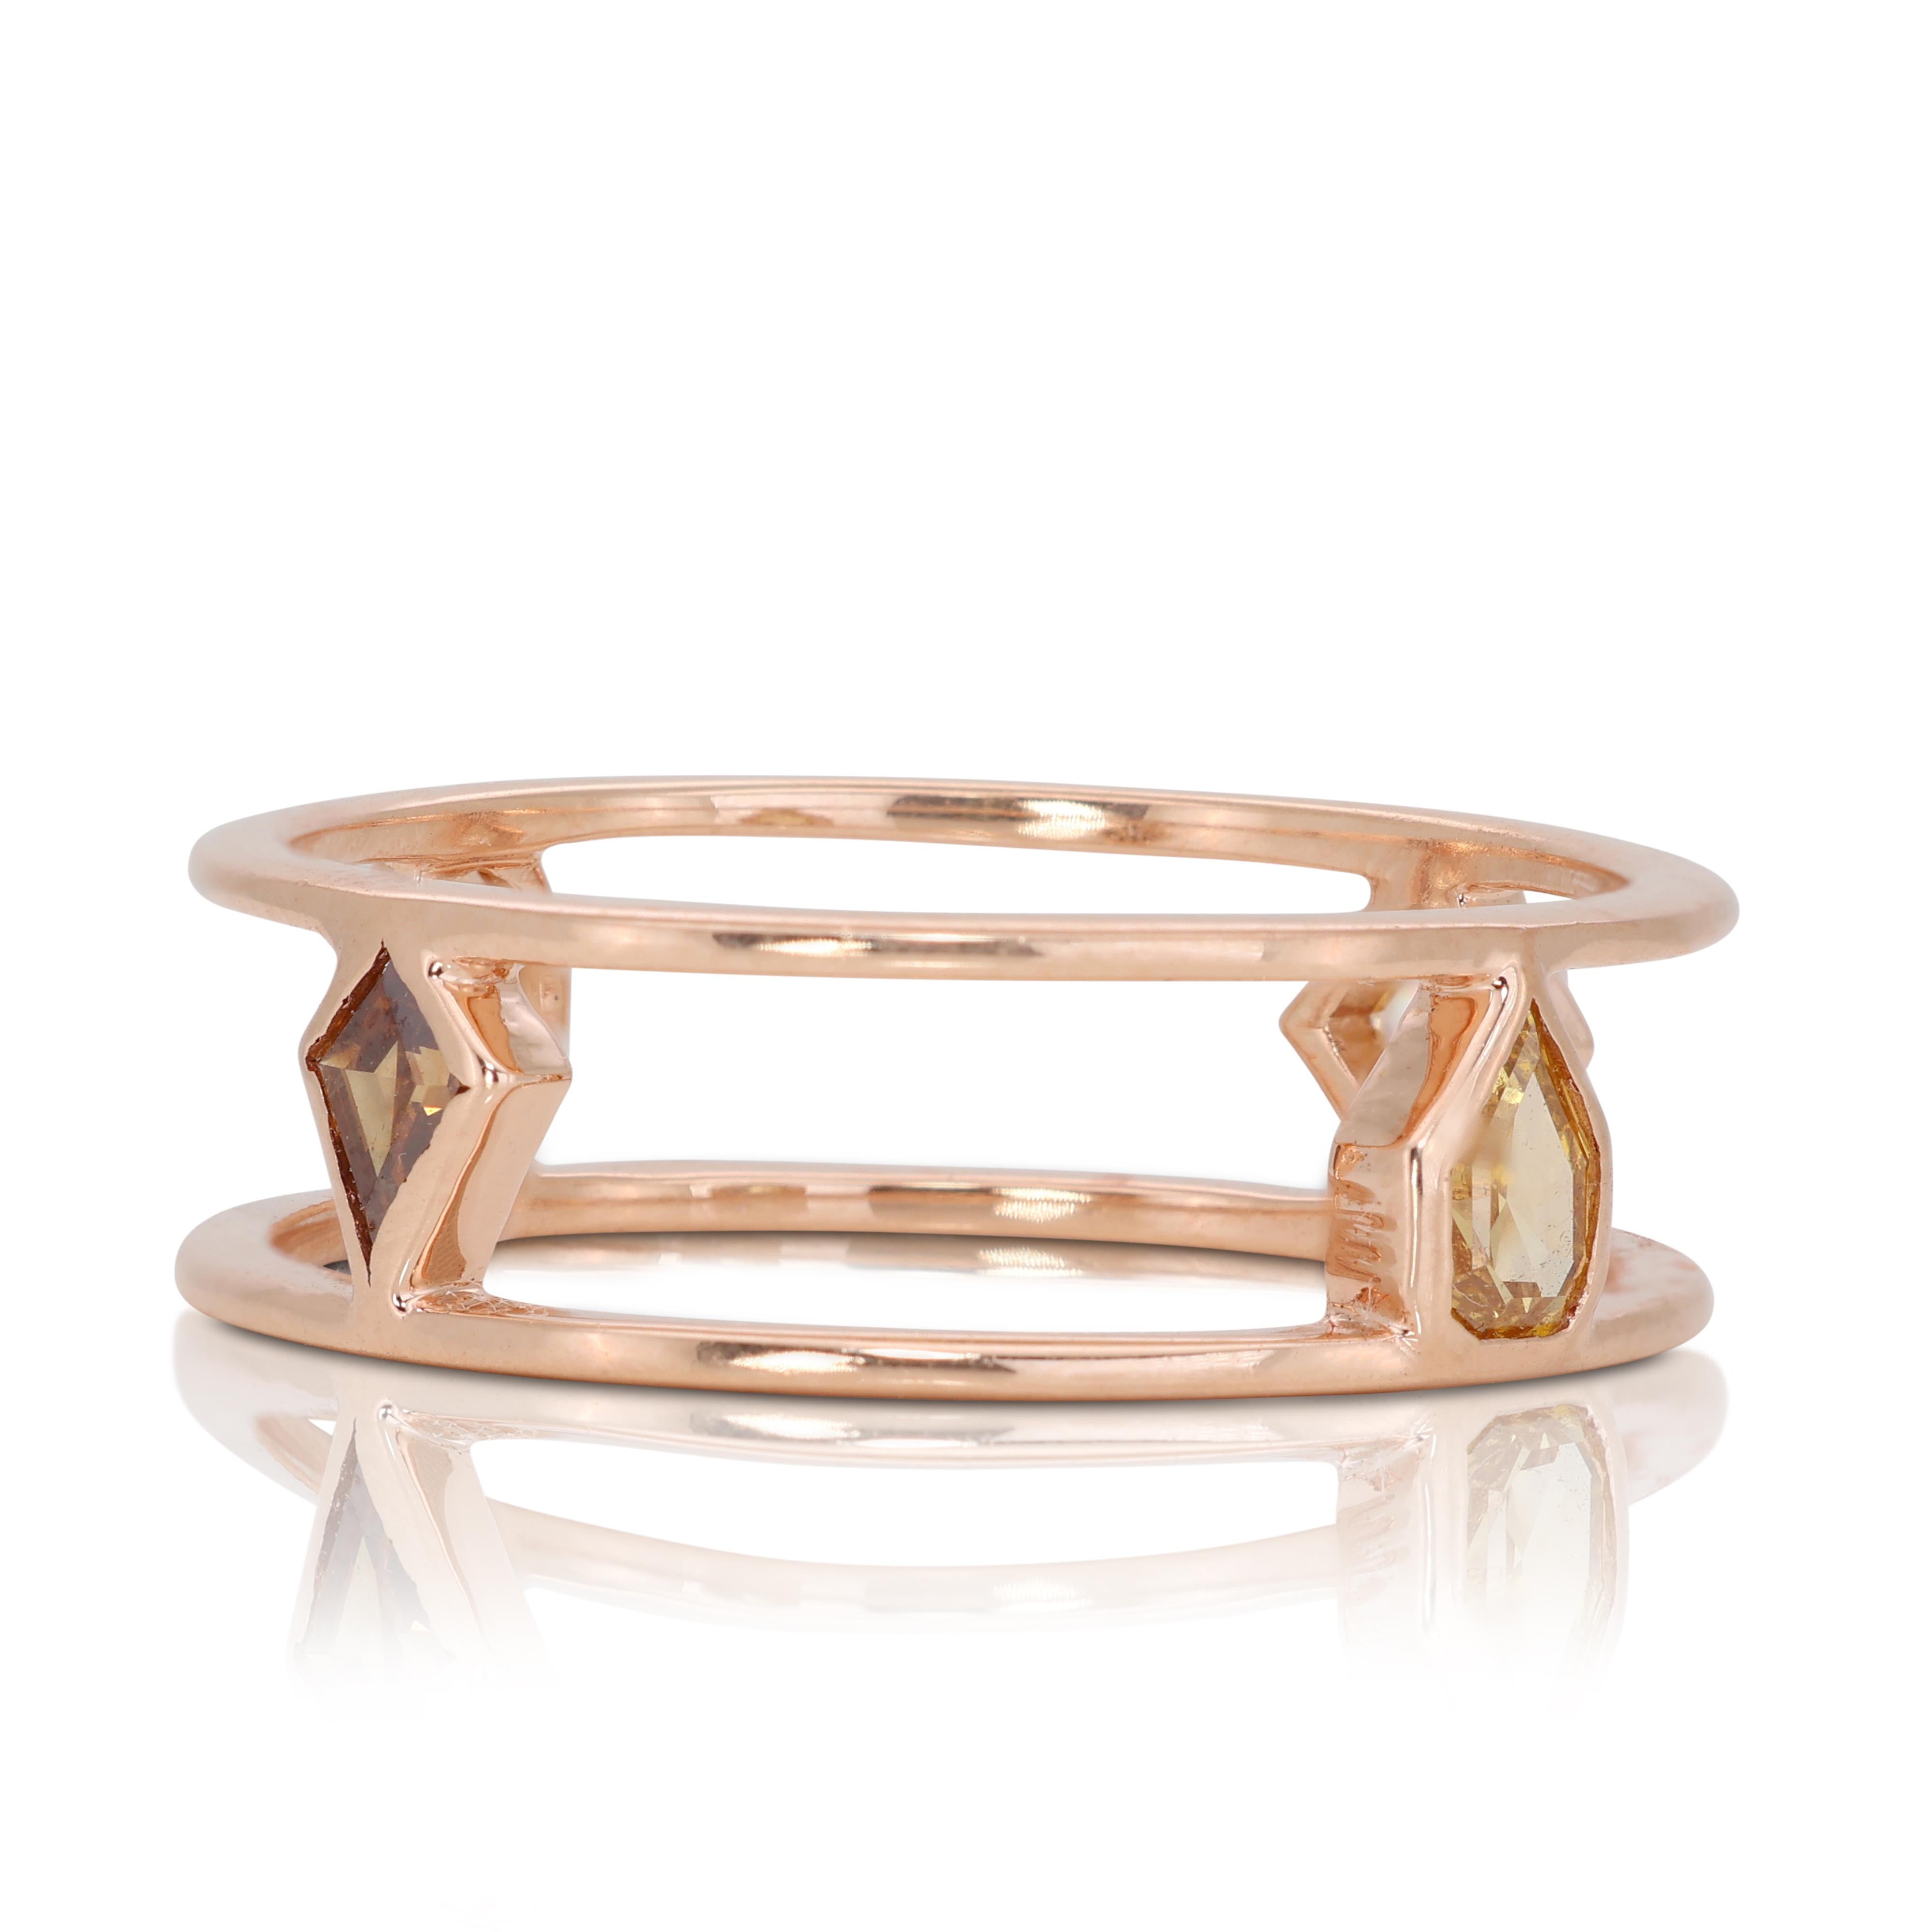 Lovely 14k Rose Gold Fancy Colored Diamond Ring w/0.56 ct - IGI Certified

Embrace the allure of uniqueness with this extraordinary fancy-colored diamond ring, set in the warm and alluring 14k rose gold. Central to this ring are two kite-shaped